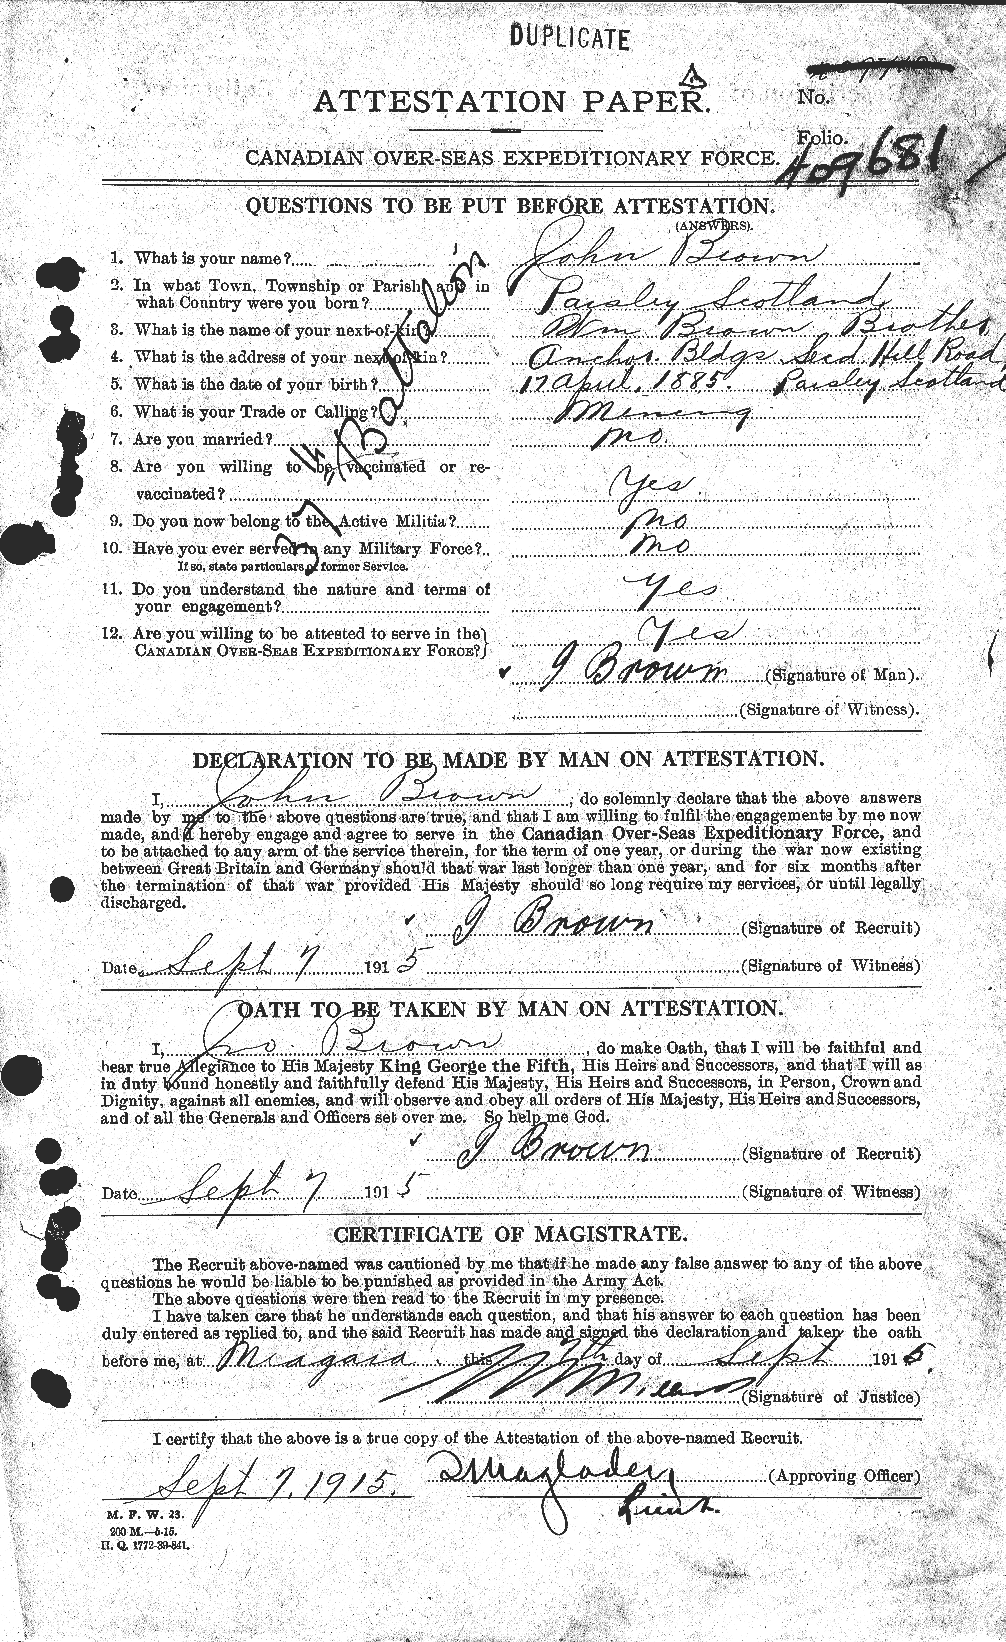 Personnel Records of the First World War - CEF 263874a